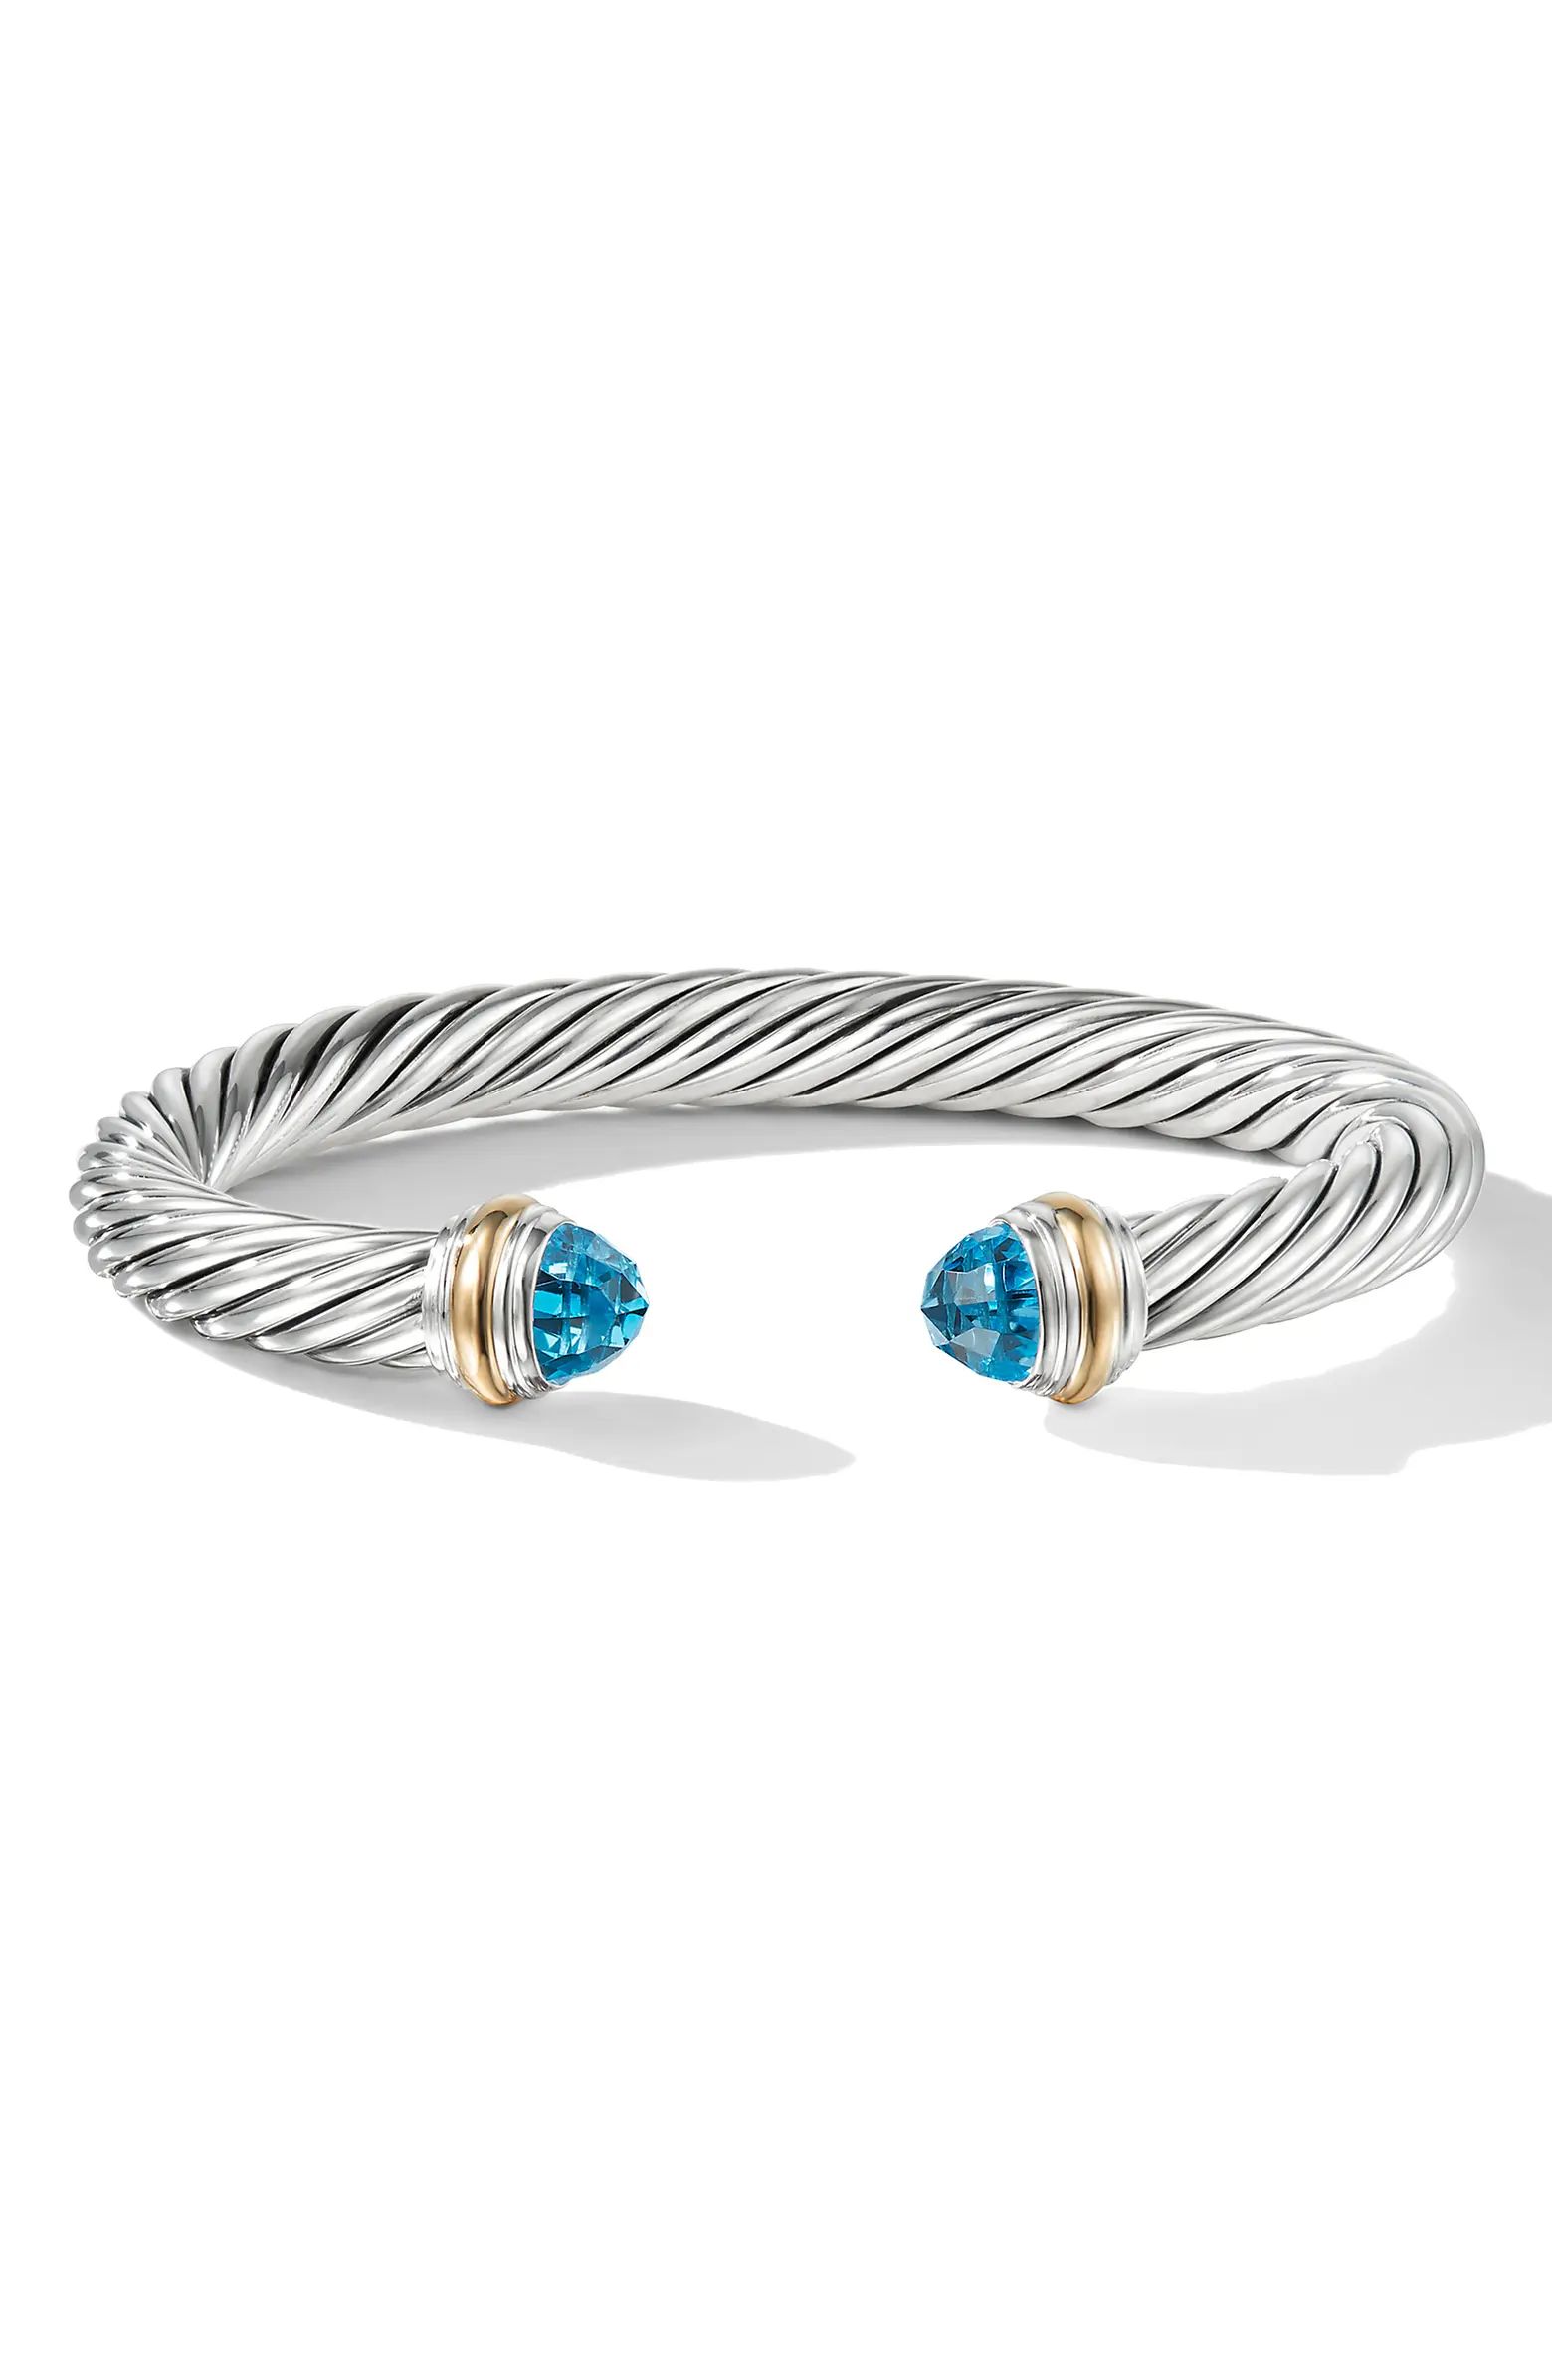 Classic Cable Bracelet in Sterling Silver with 14K Yellow Gold and Semiprecious Stones, 7mm | Nordstrom